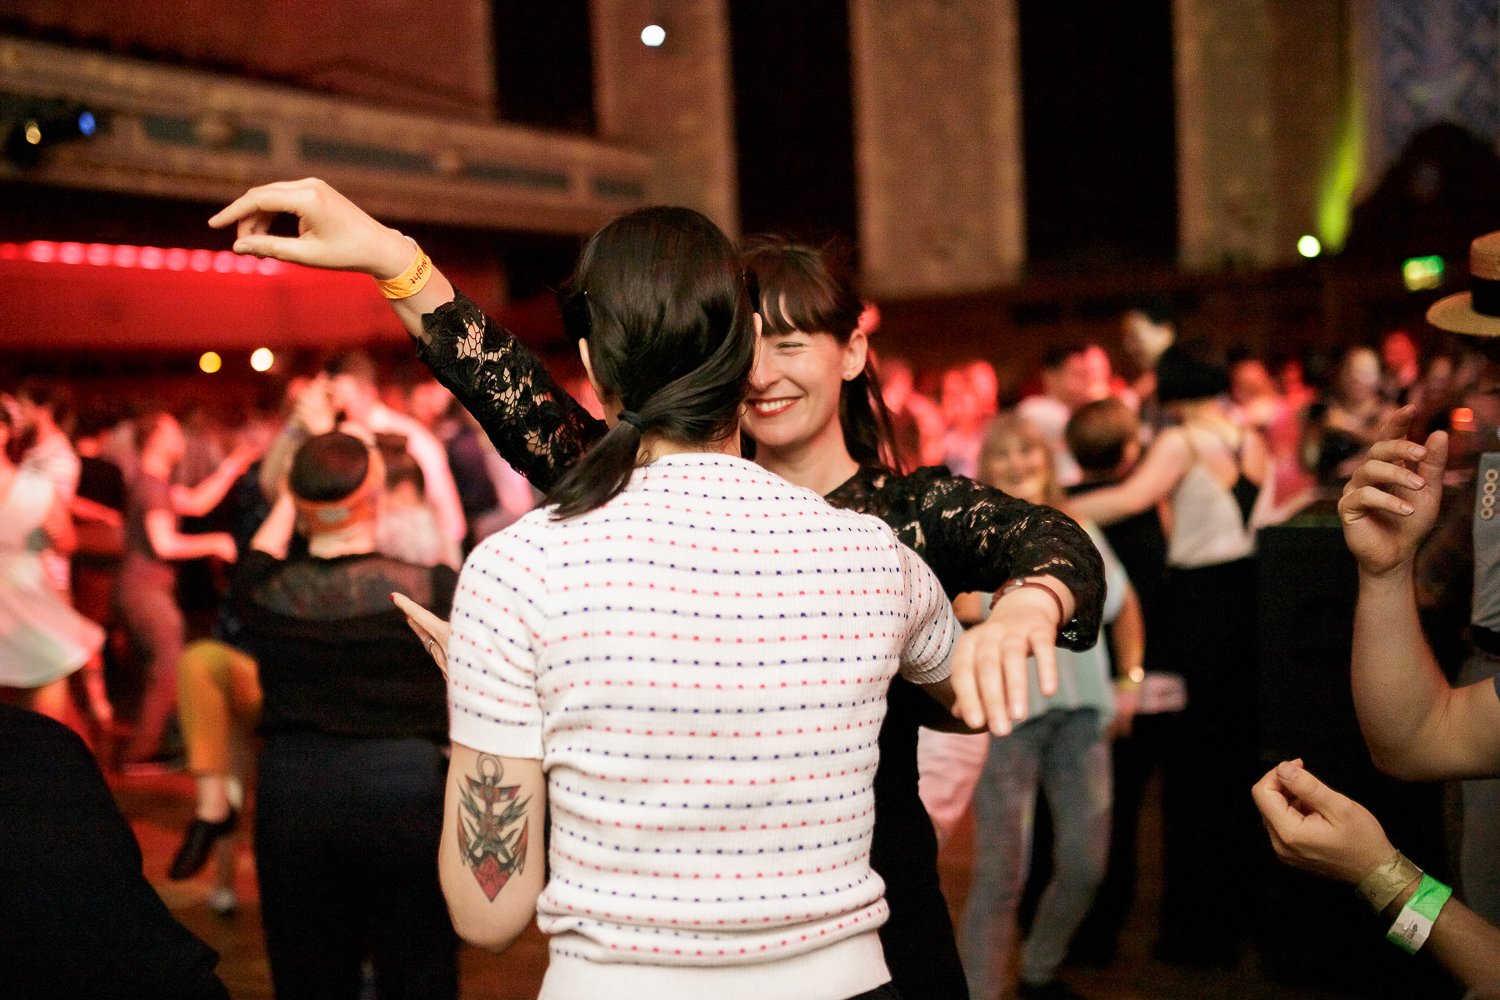  The London Swing Festival 2016 - Photo Credit: For Dancers Only - http://www.ebobrie.com/london-swing-festival-2016 